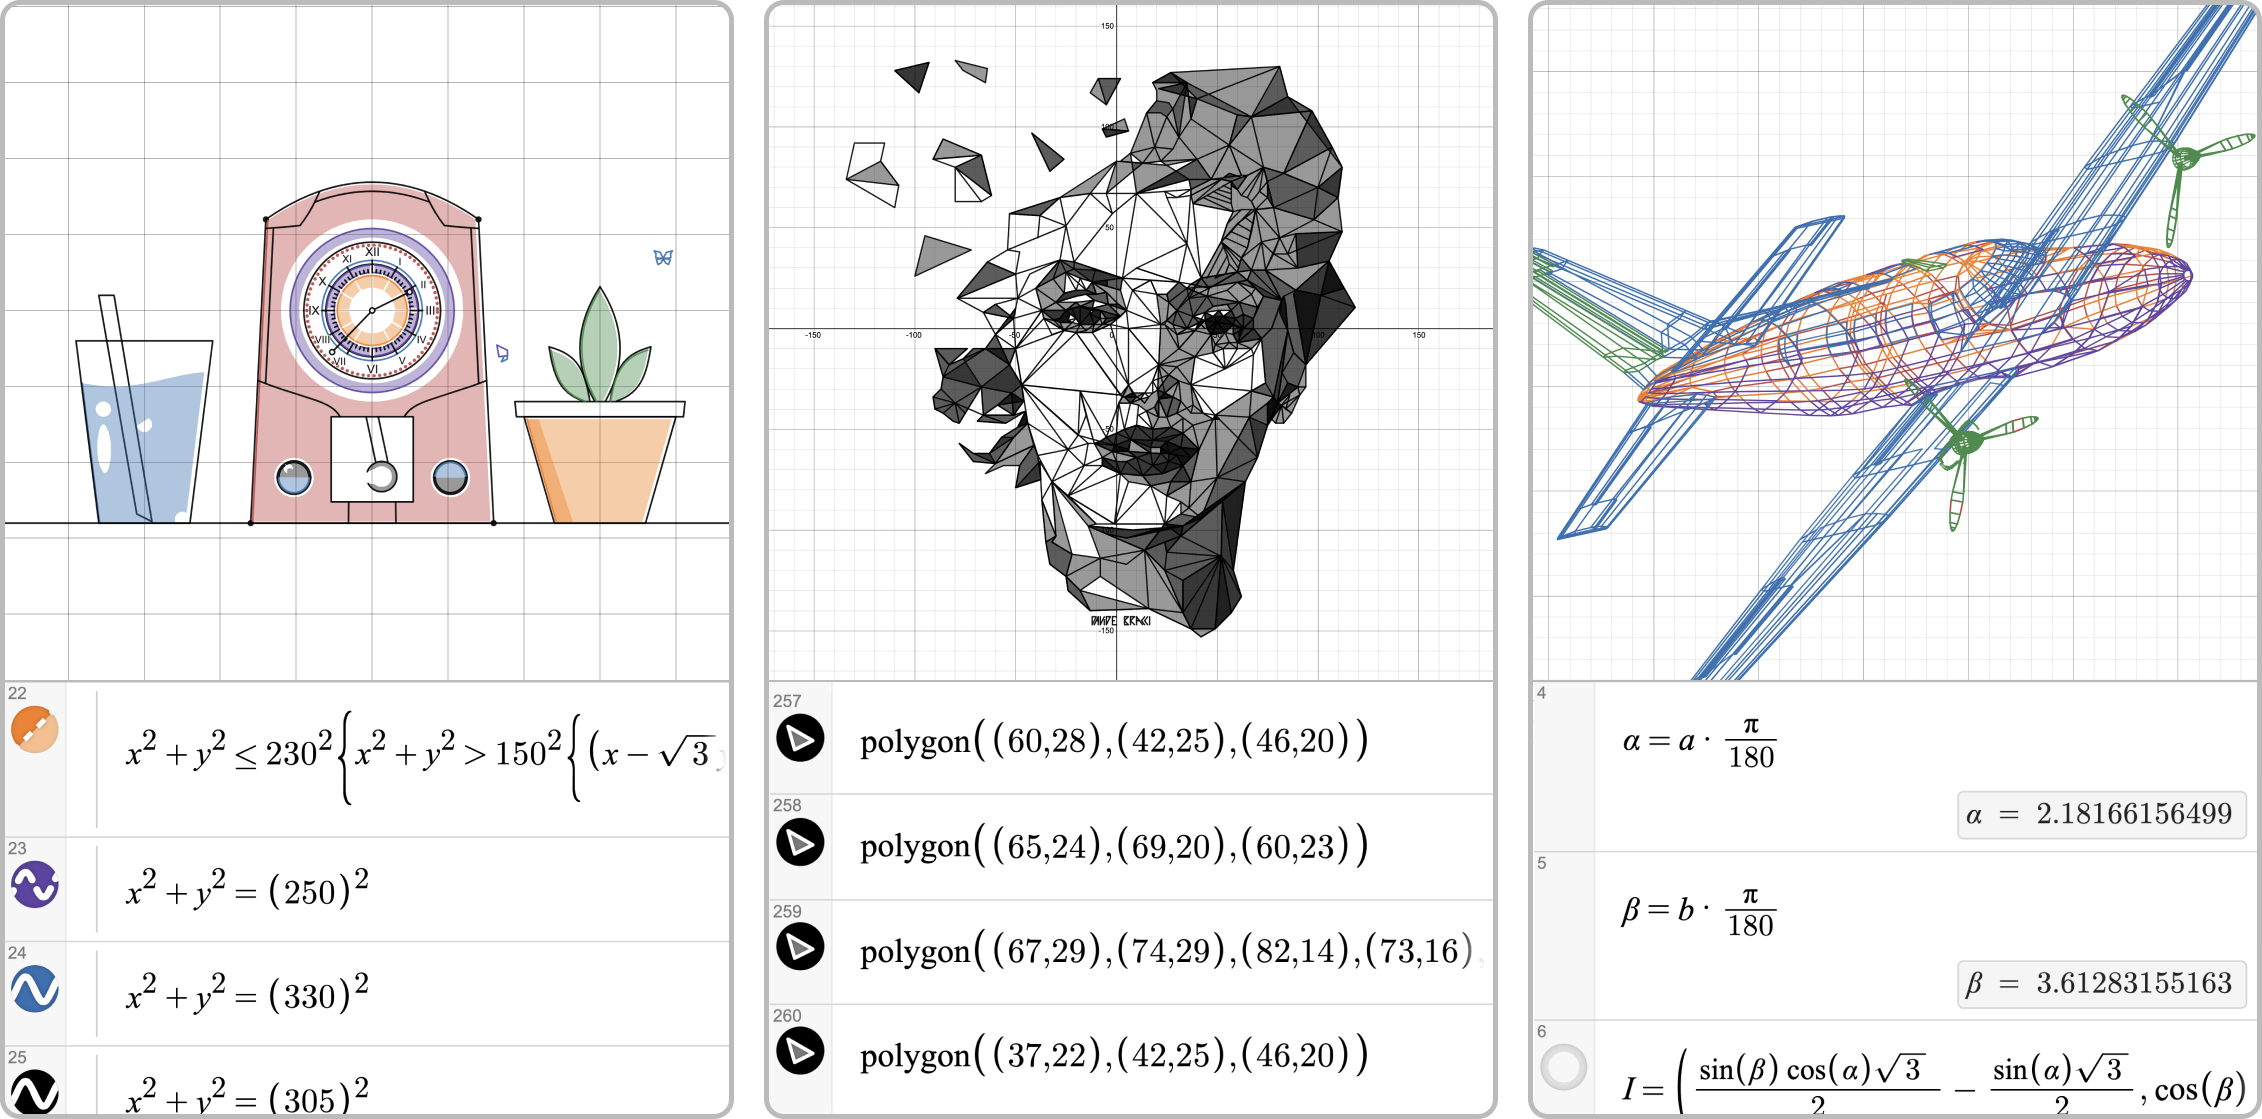 Three artistic graphs- a little clock with a bubbly drink and a little plant, a portrait of Marilyn Monroe made entirely of polygons, and a 3-D rendering of an airplane, together with a peek at some of the equations that generated them.